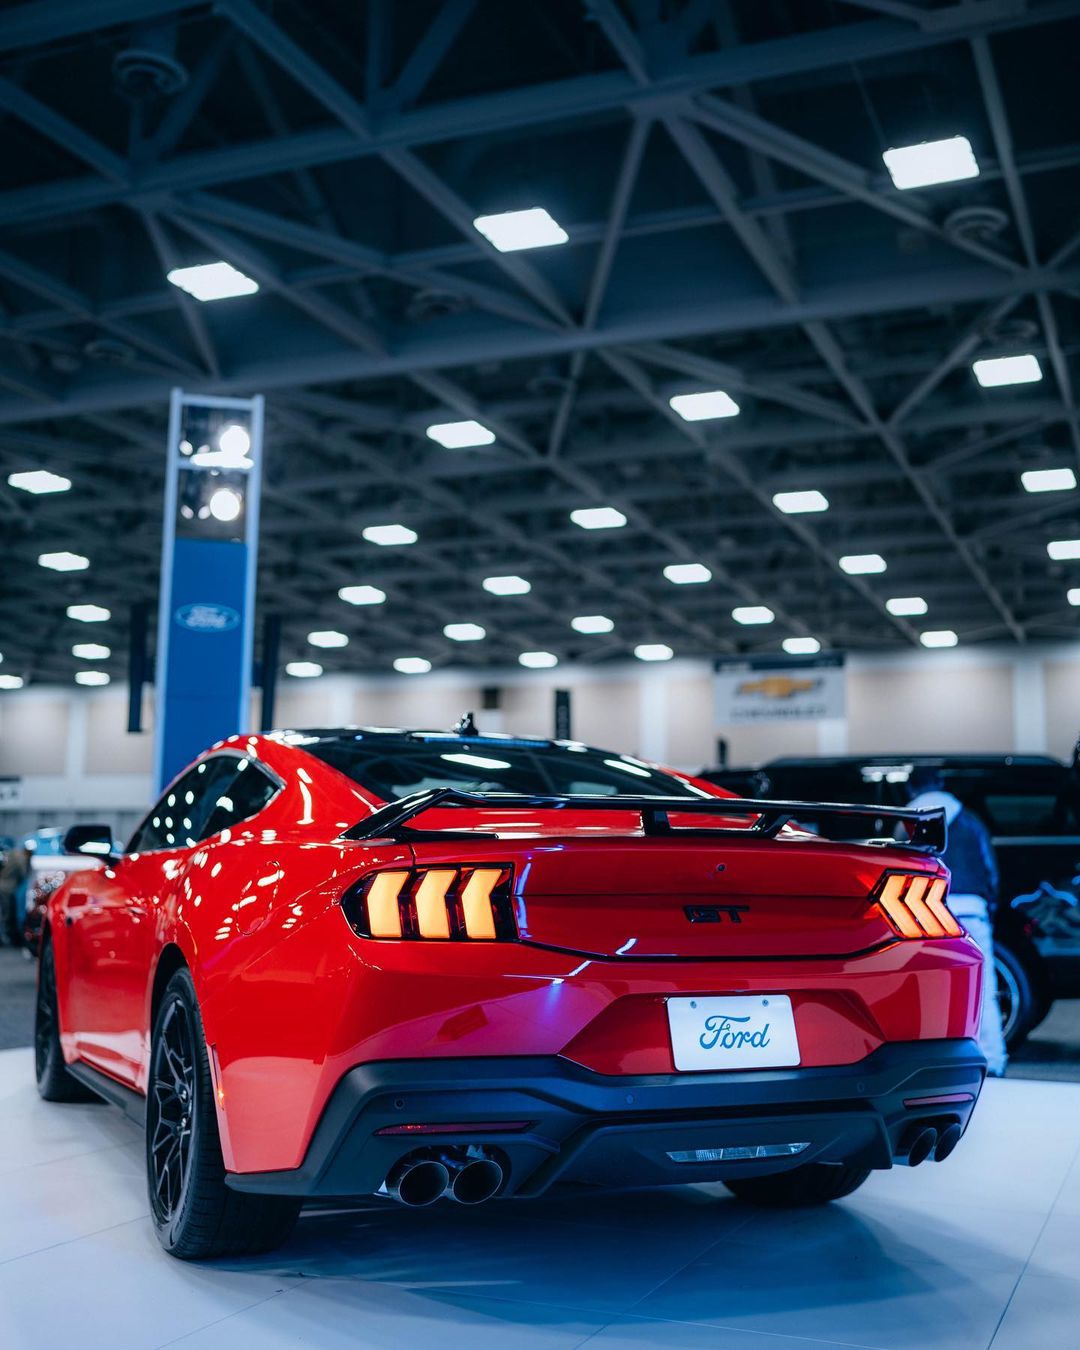 S650 Mustang Beautiful Race Red GT S650 Mustang at Auto Show Race Red Mustang S650 GT 5